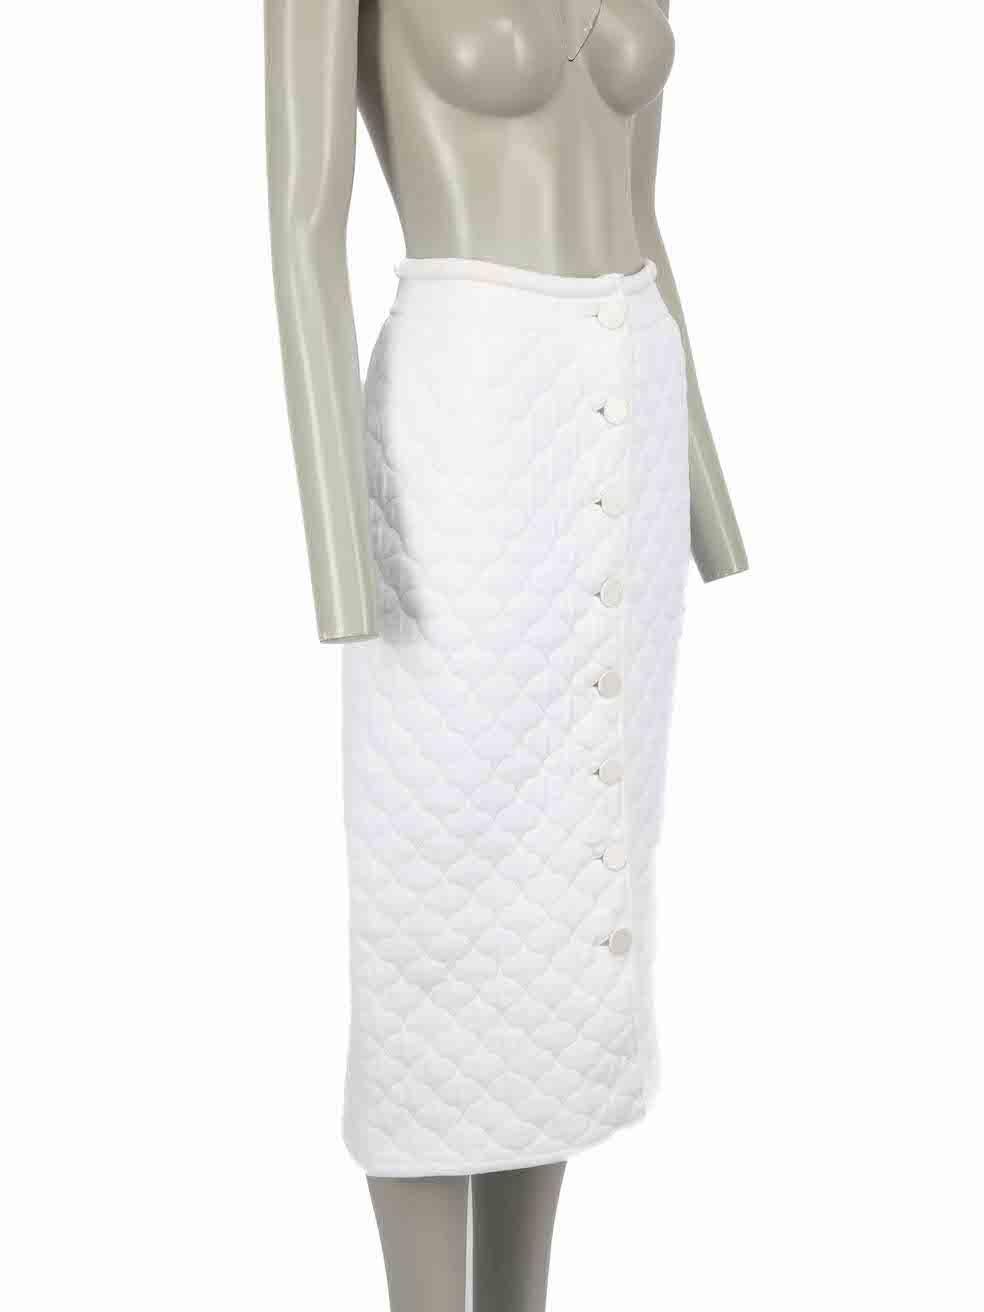 CONDITION is Very good. Minimal wear to dress is evident. Minimal wear to waistband and centre front with small discolouration on this used Fendi designer resale item.

Details
White
Viscose
Midi skirt
Quilted accent
Stretchy
Front button up